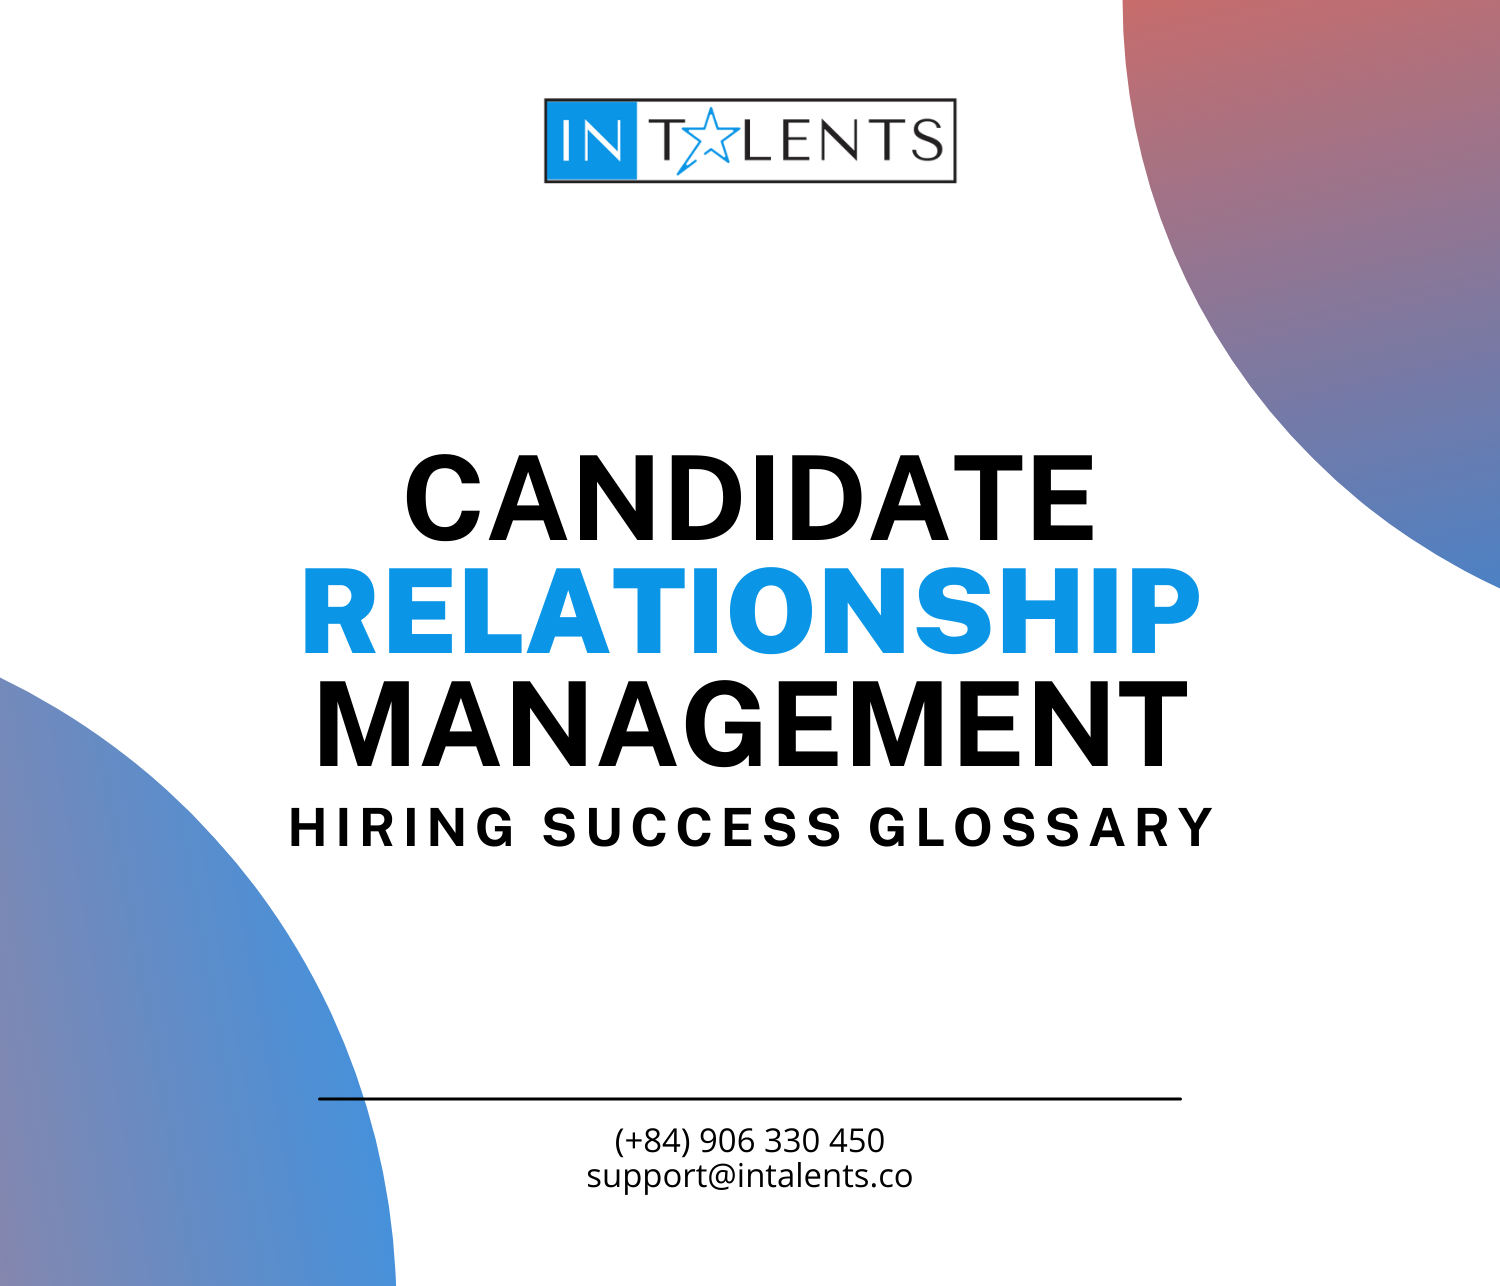 CANDIDATE RELATIONSHIP MANAGEMENT: HIRING SUCCESS GLOSSARY